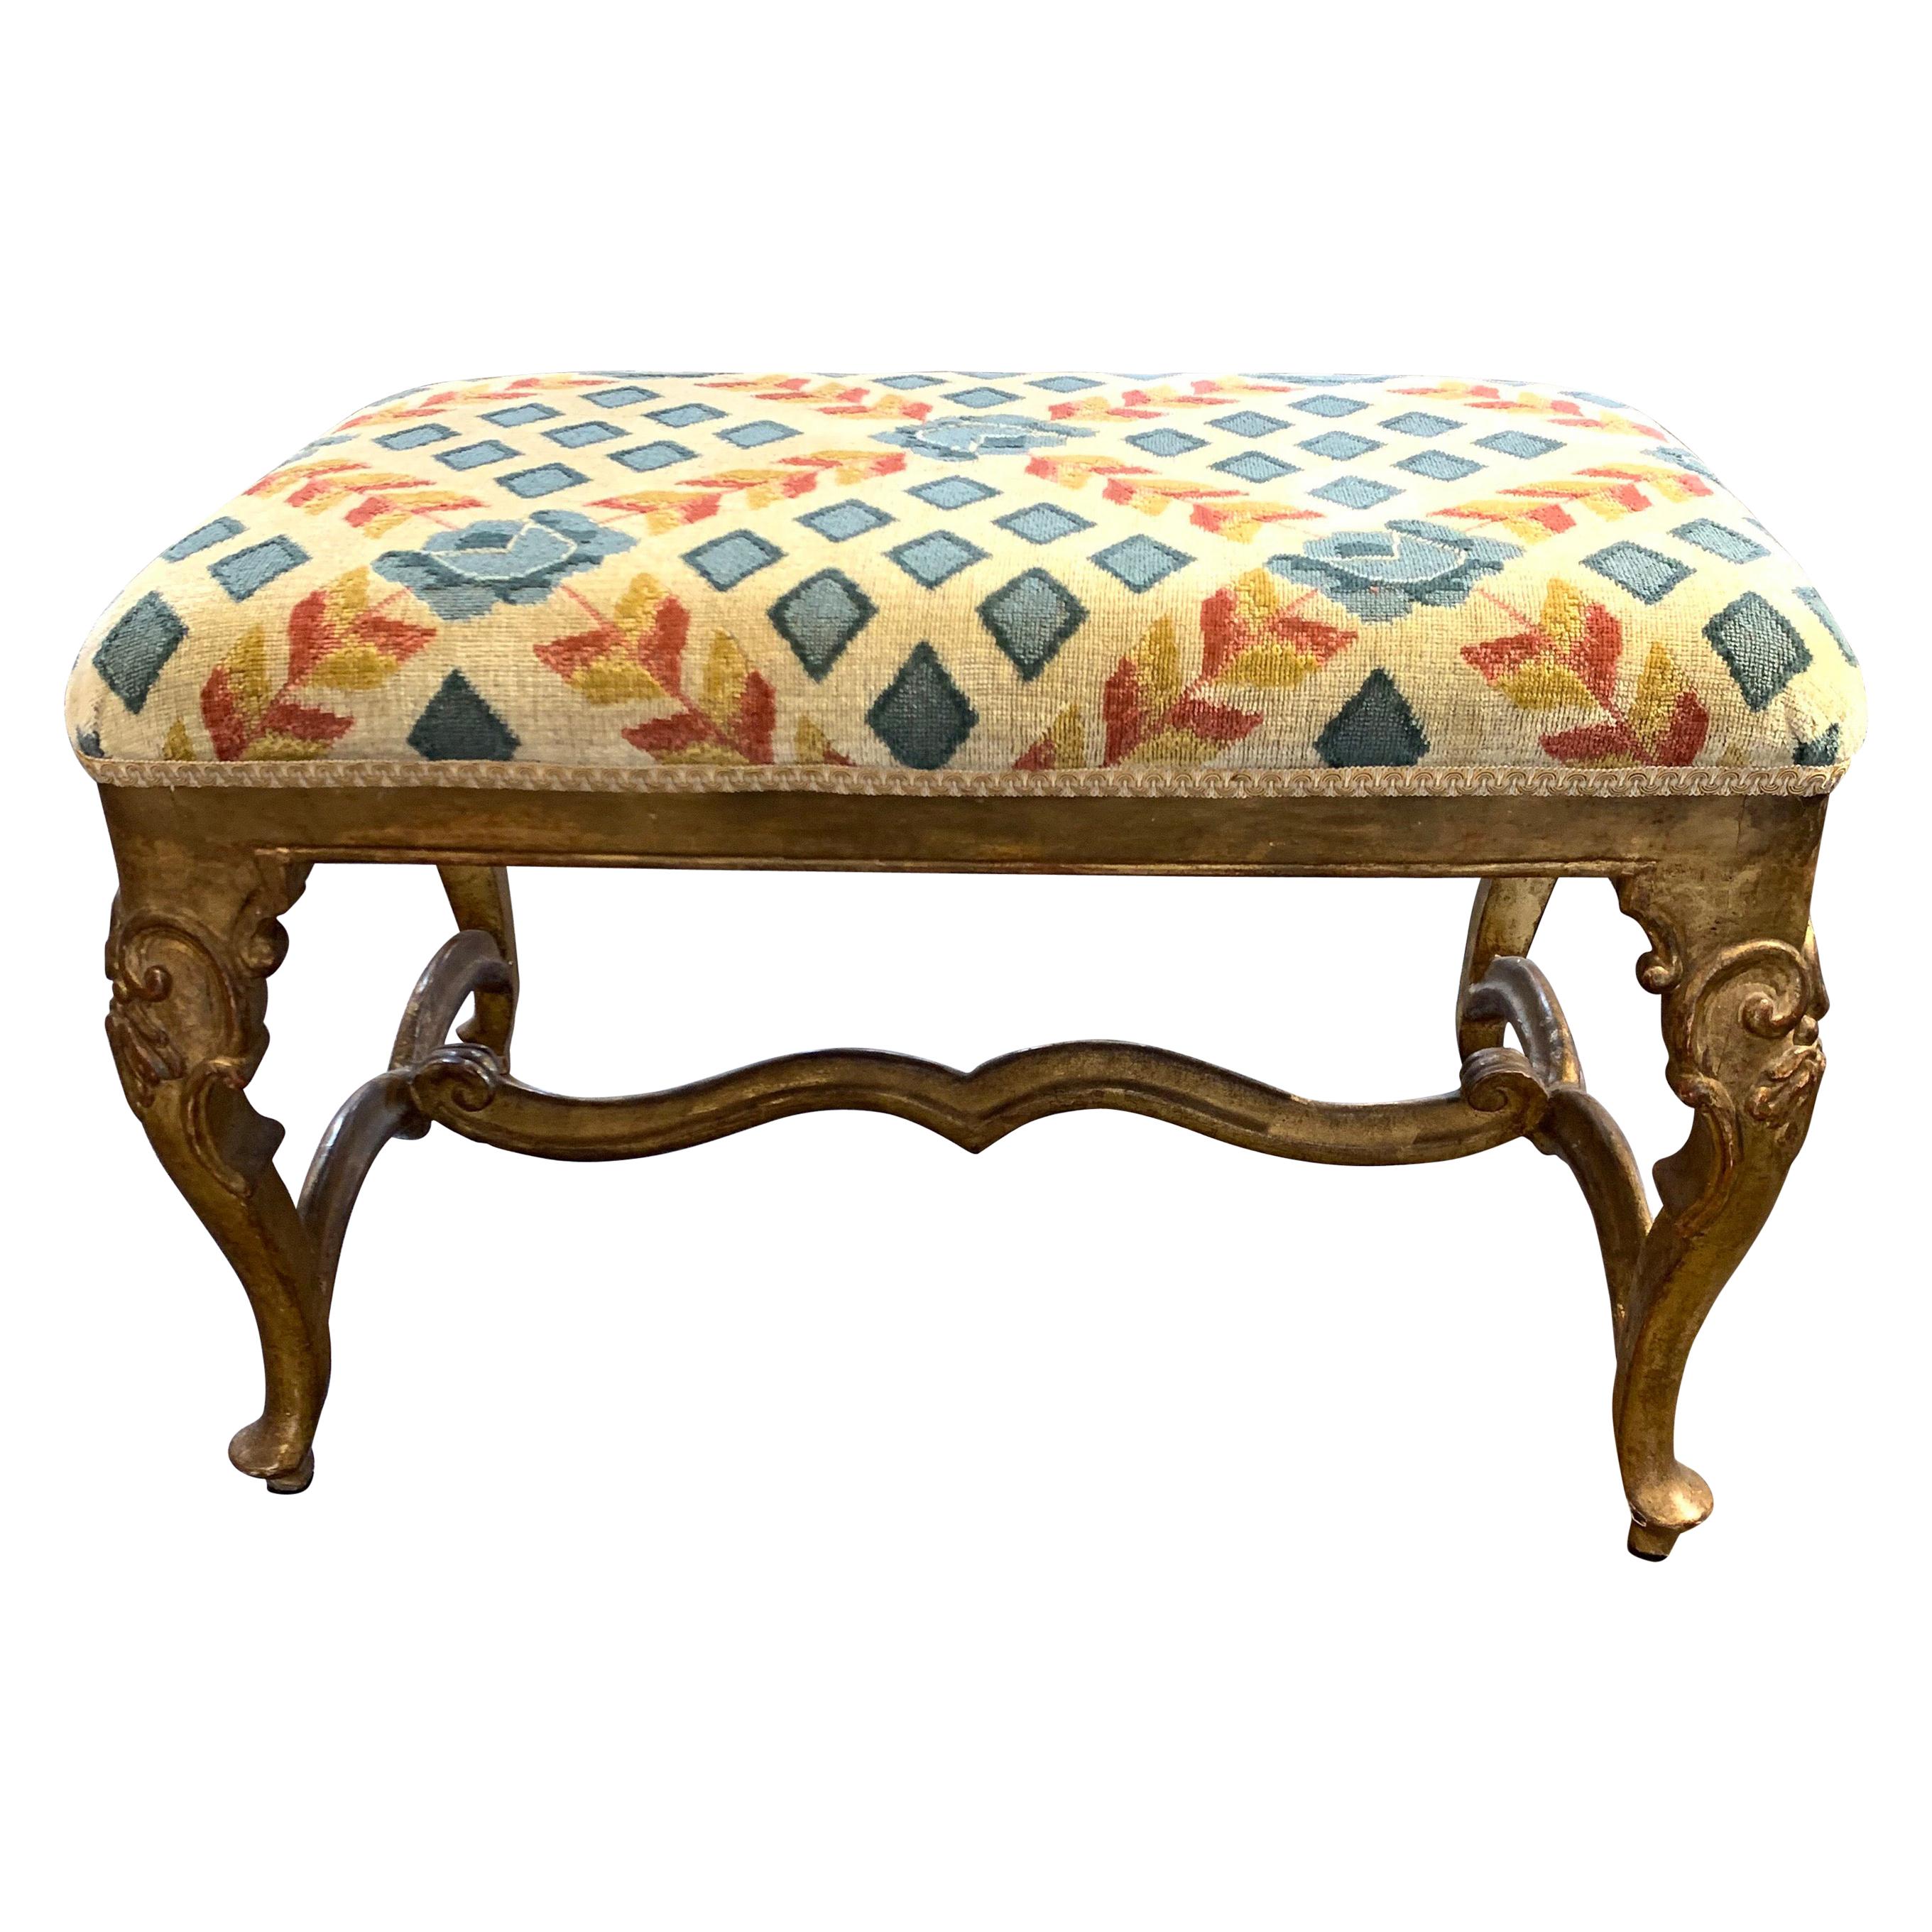 19th Century Italian Carved and Giltwood Upholstered Bench